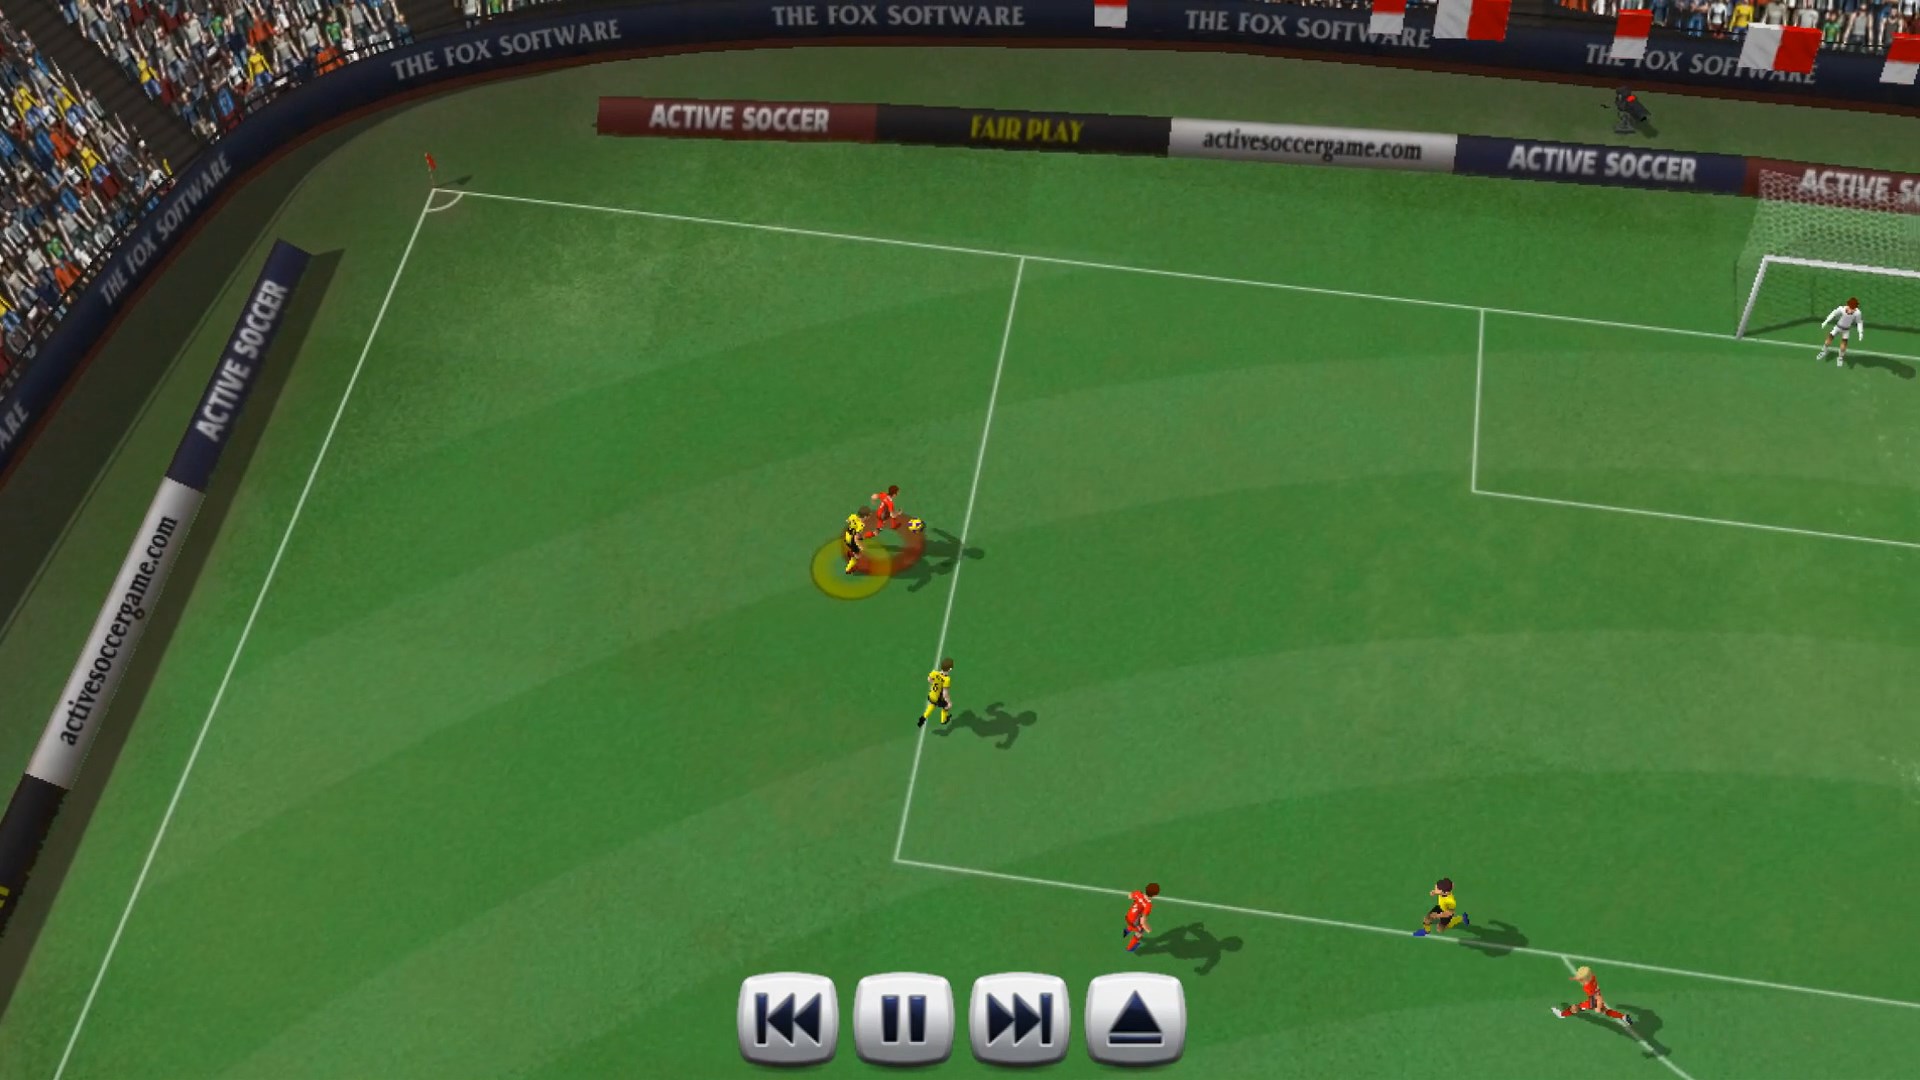 Active Soccer 2 DX. Active Soccer 2 DX PS Vita. Active games. Active game System.